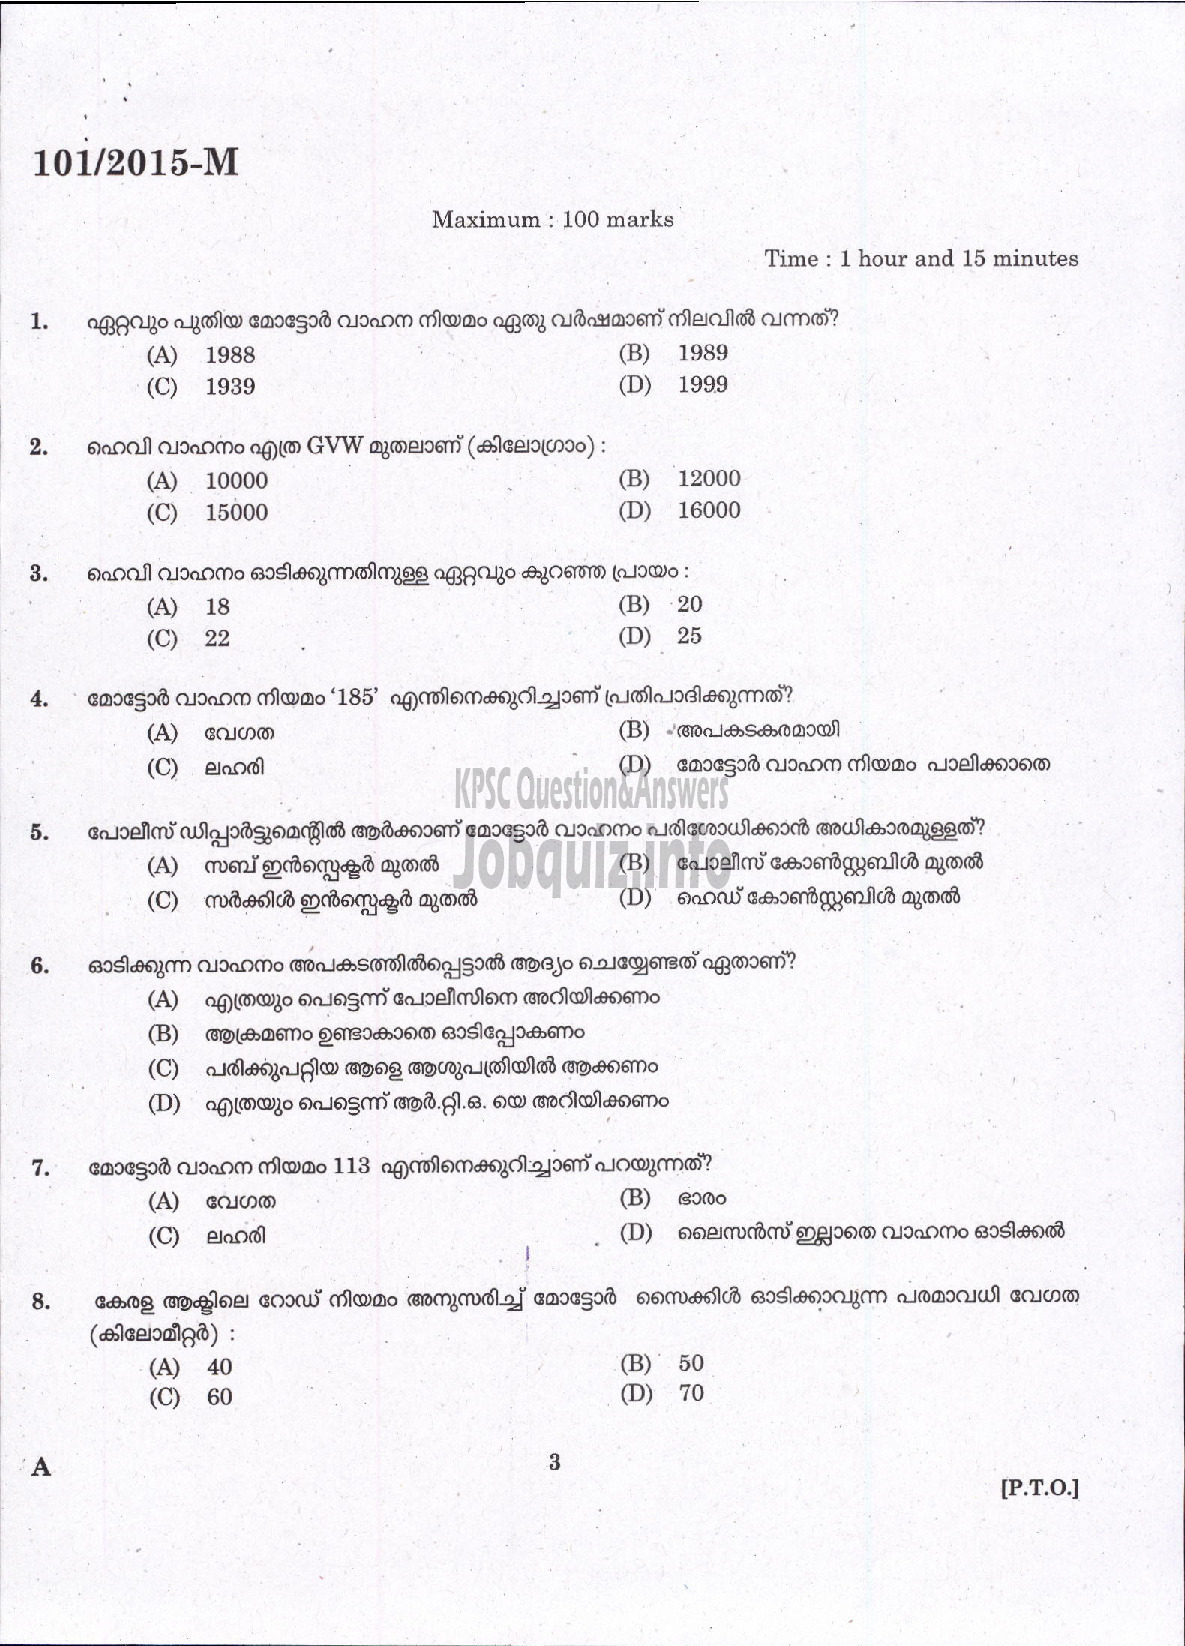 Kerala PSC Question Paper - FIREMAN DRIVER CUM PUMP OPERATOR TRAINEE FIRE AND RESCUE SERVICES ( Malayalam ) -1